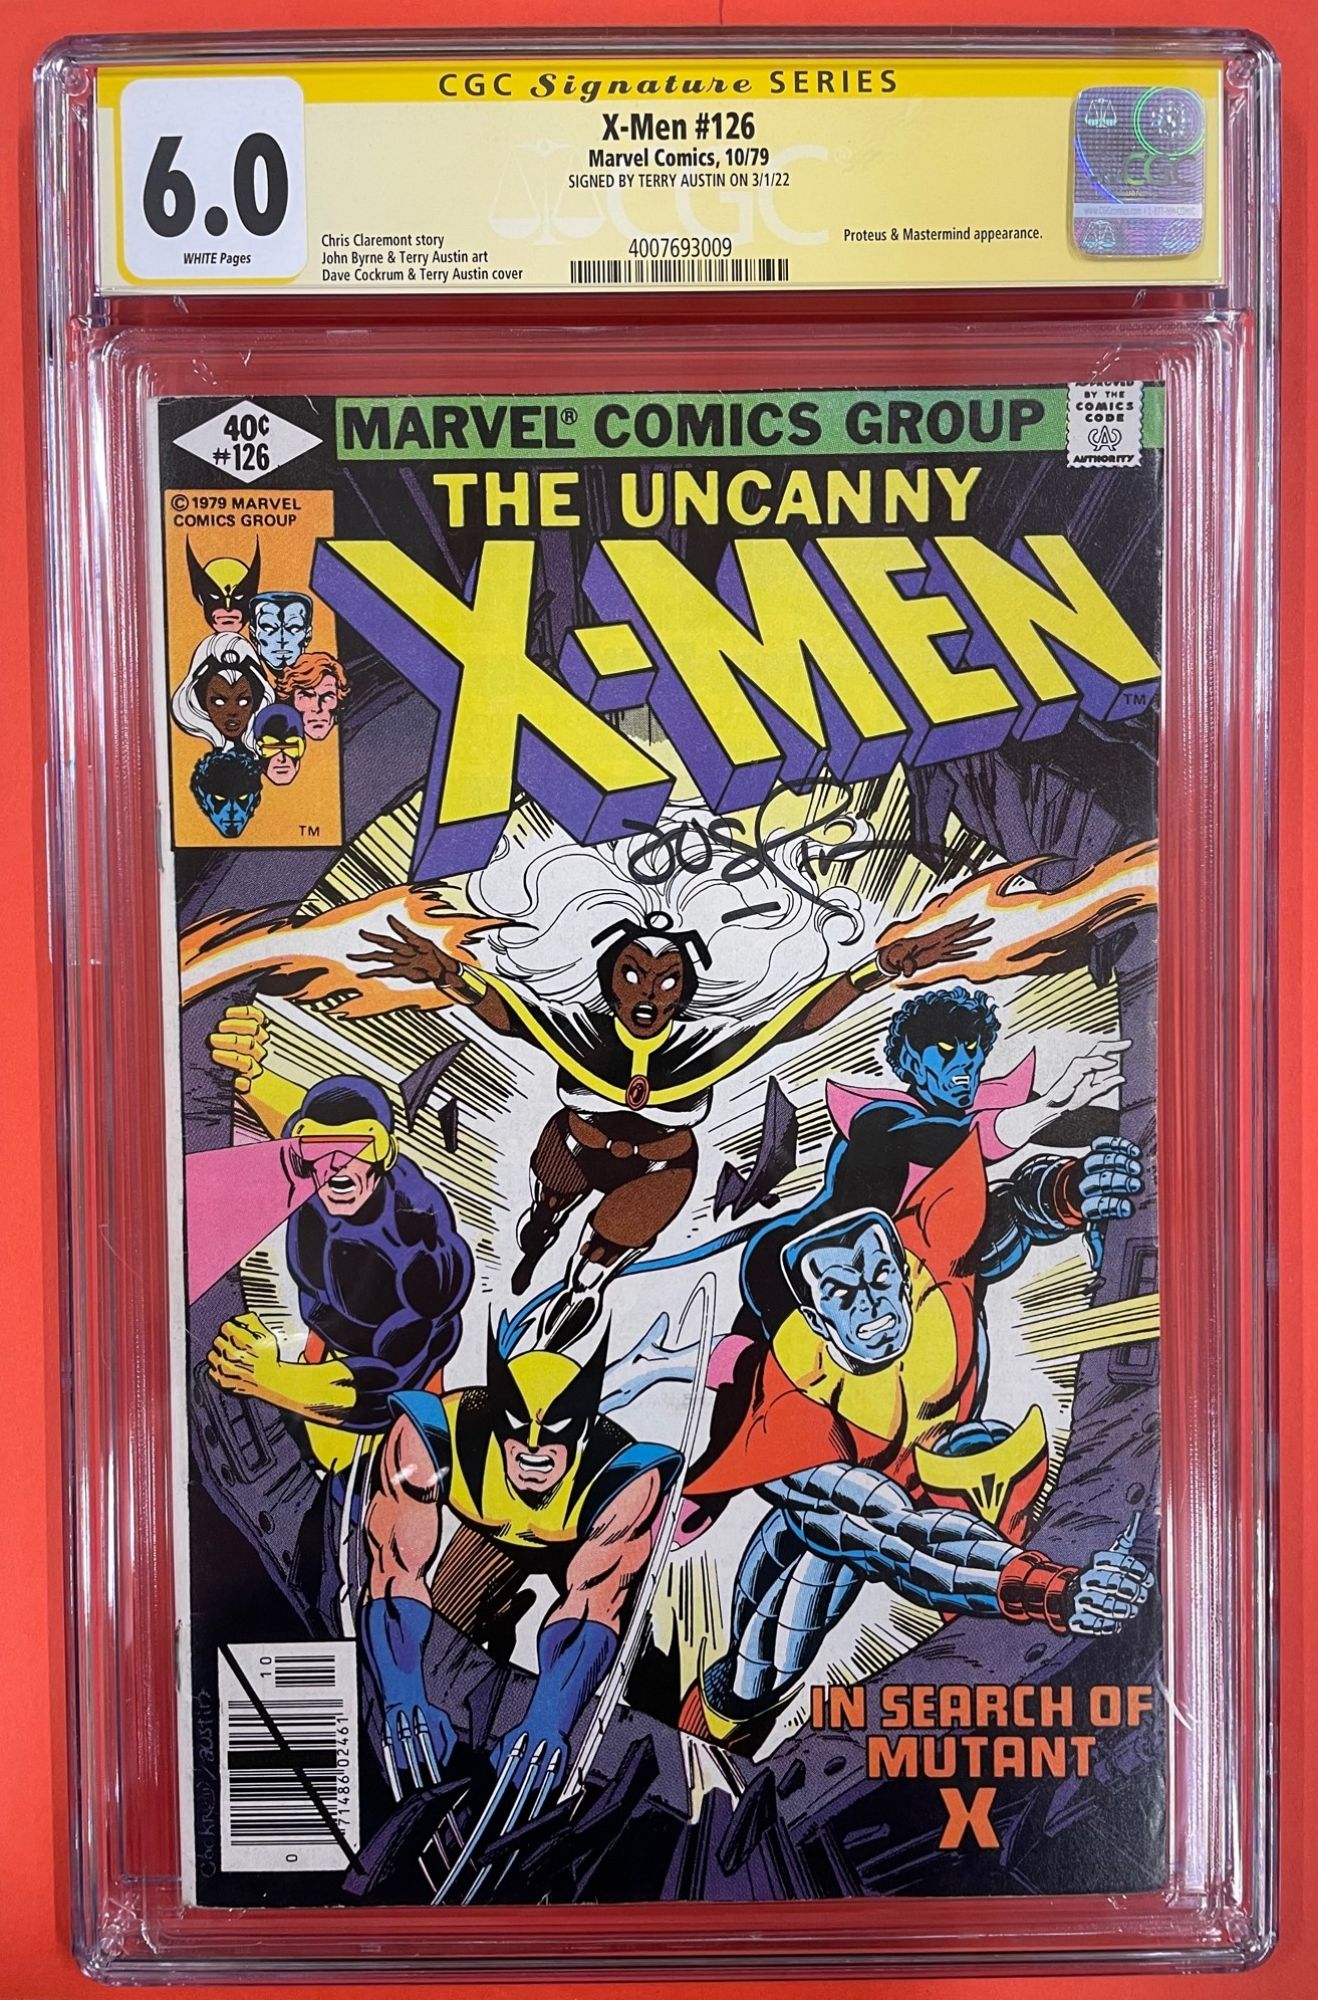 X-Men #126, Oct 1979, 6.0 FN CGC Signed by Terry Austin